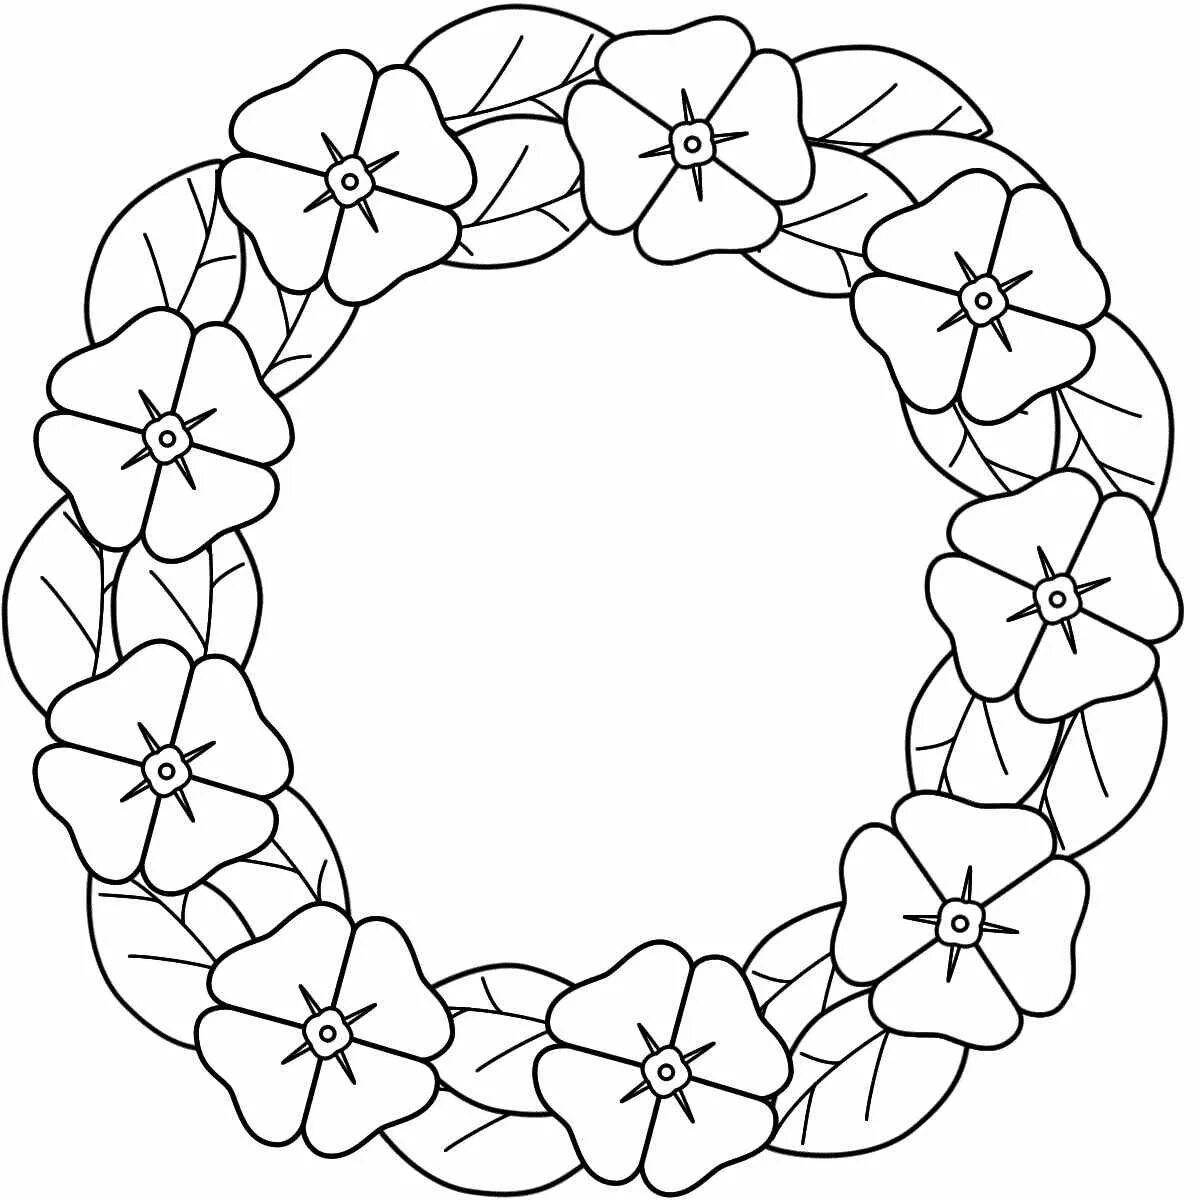 Coloring page poetic wreath